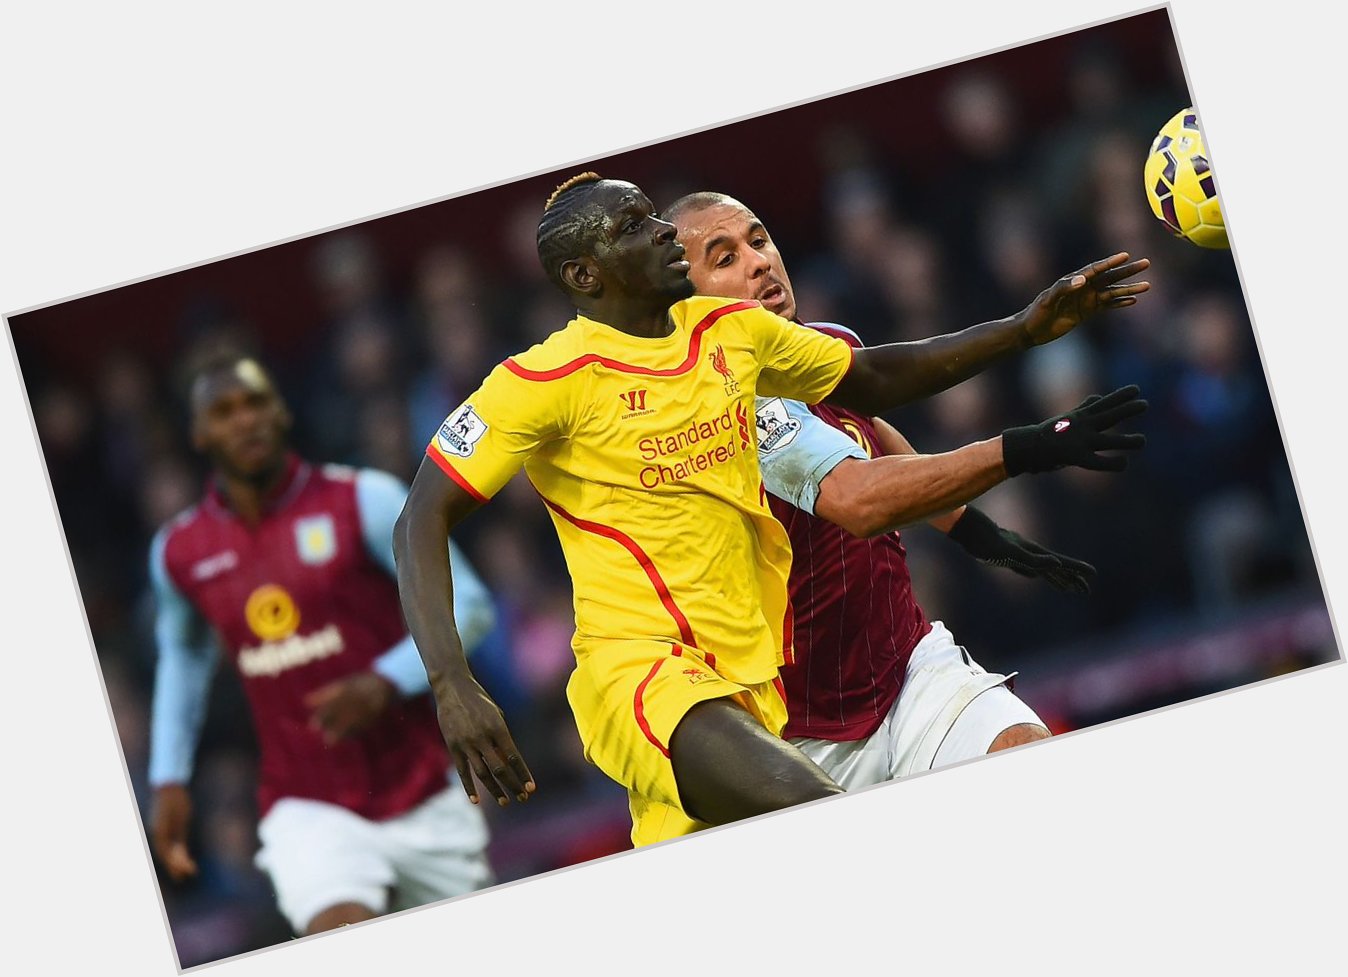 Happy 25th birthday to Mamadou Sakho! The Frenchman has won 67% of his 24 tackles in the PL. 